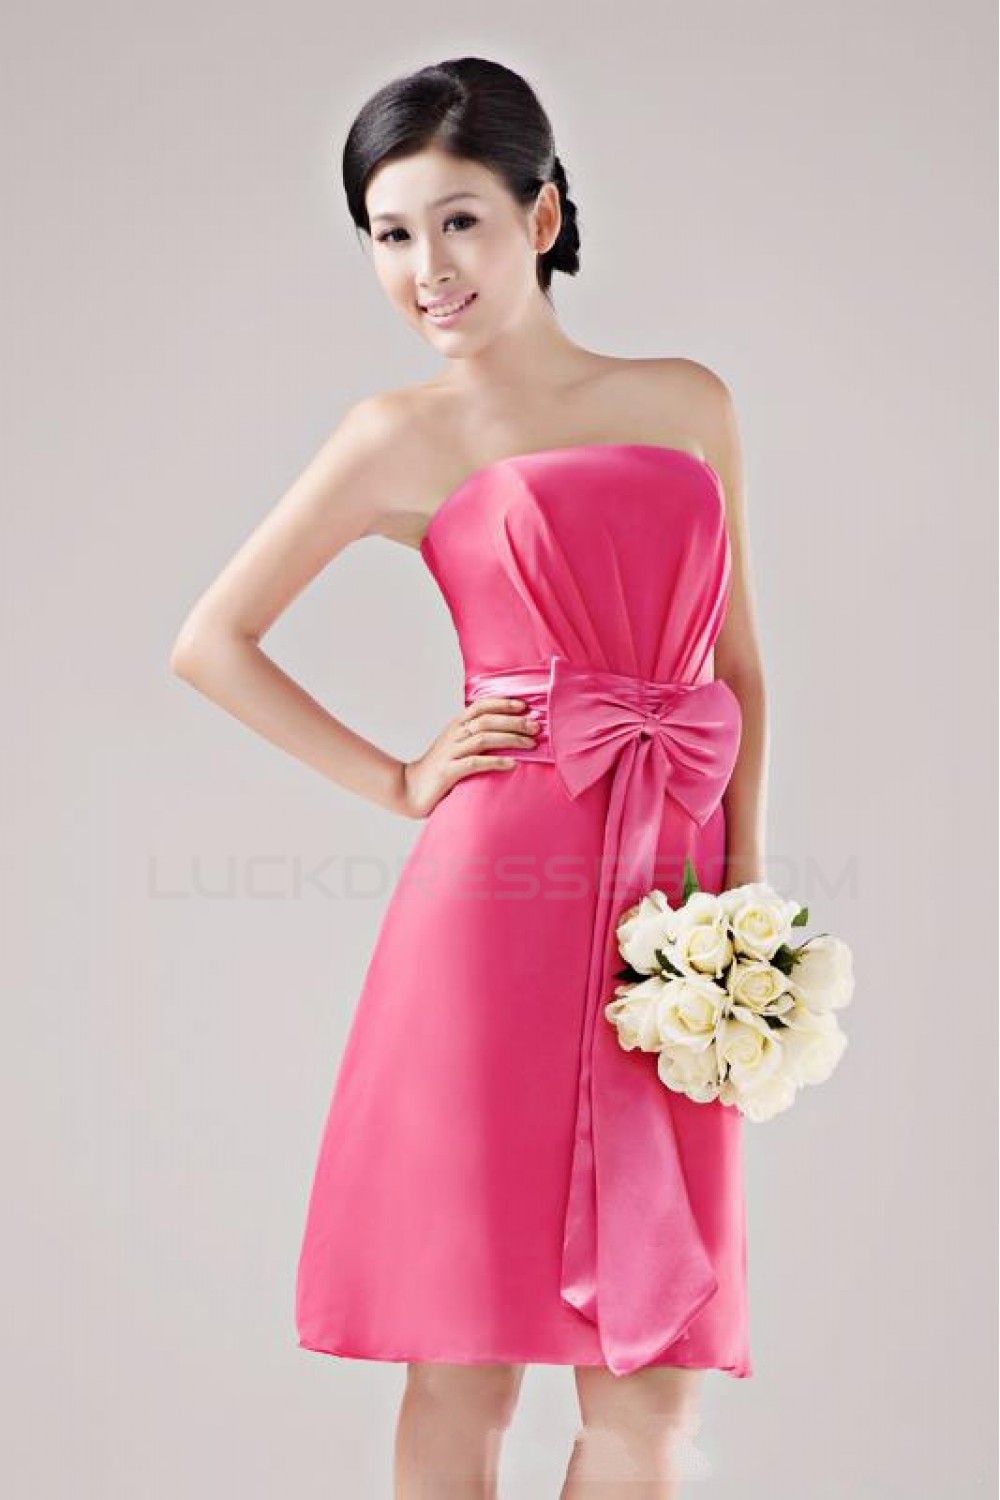 A-Line Strapless Short Hot Pink Bridesmaid Dresses/Wedding Party ...